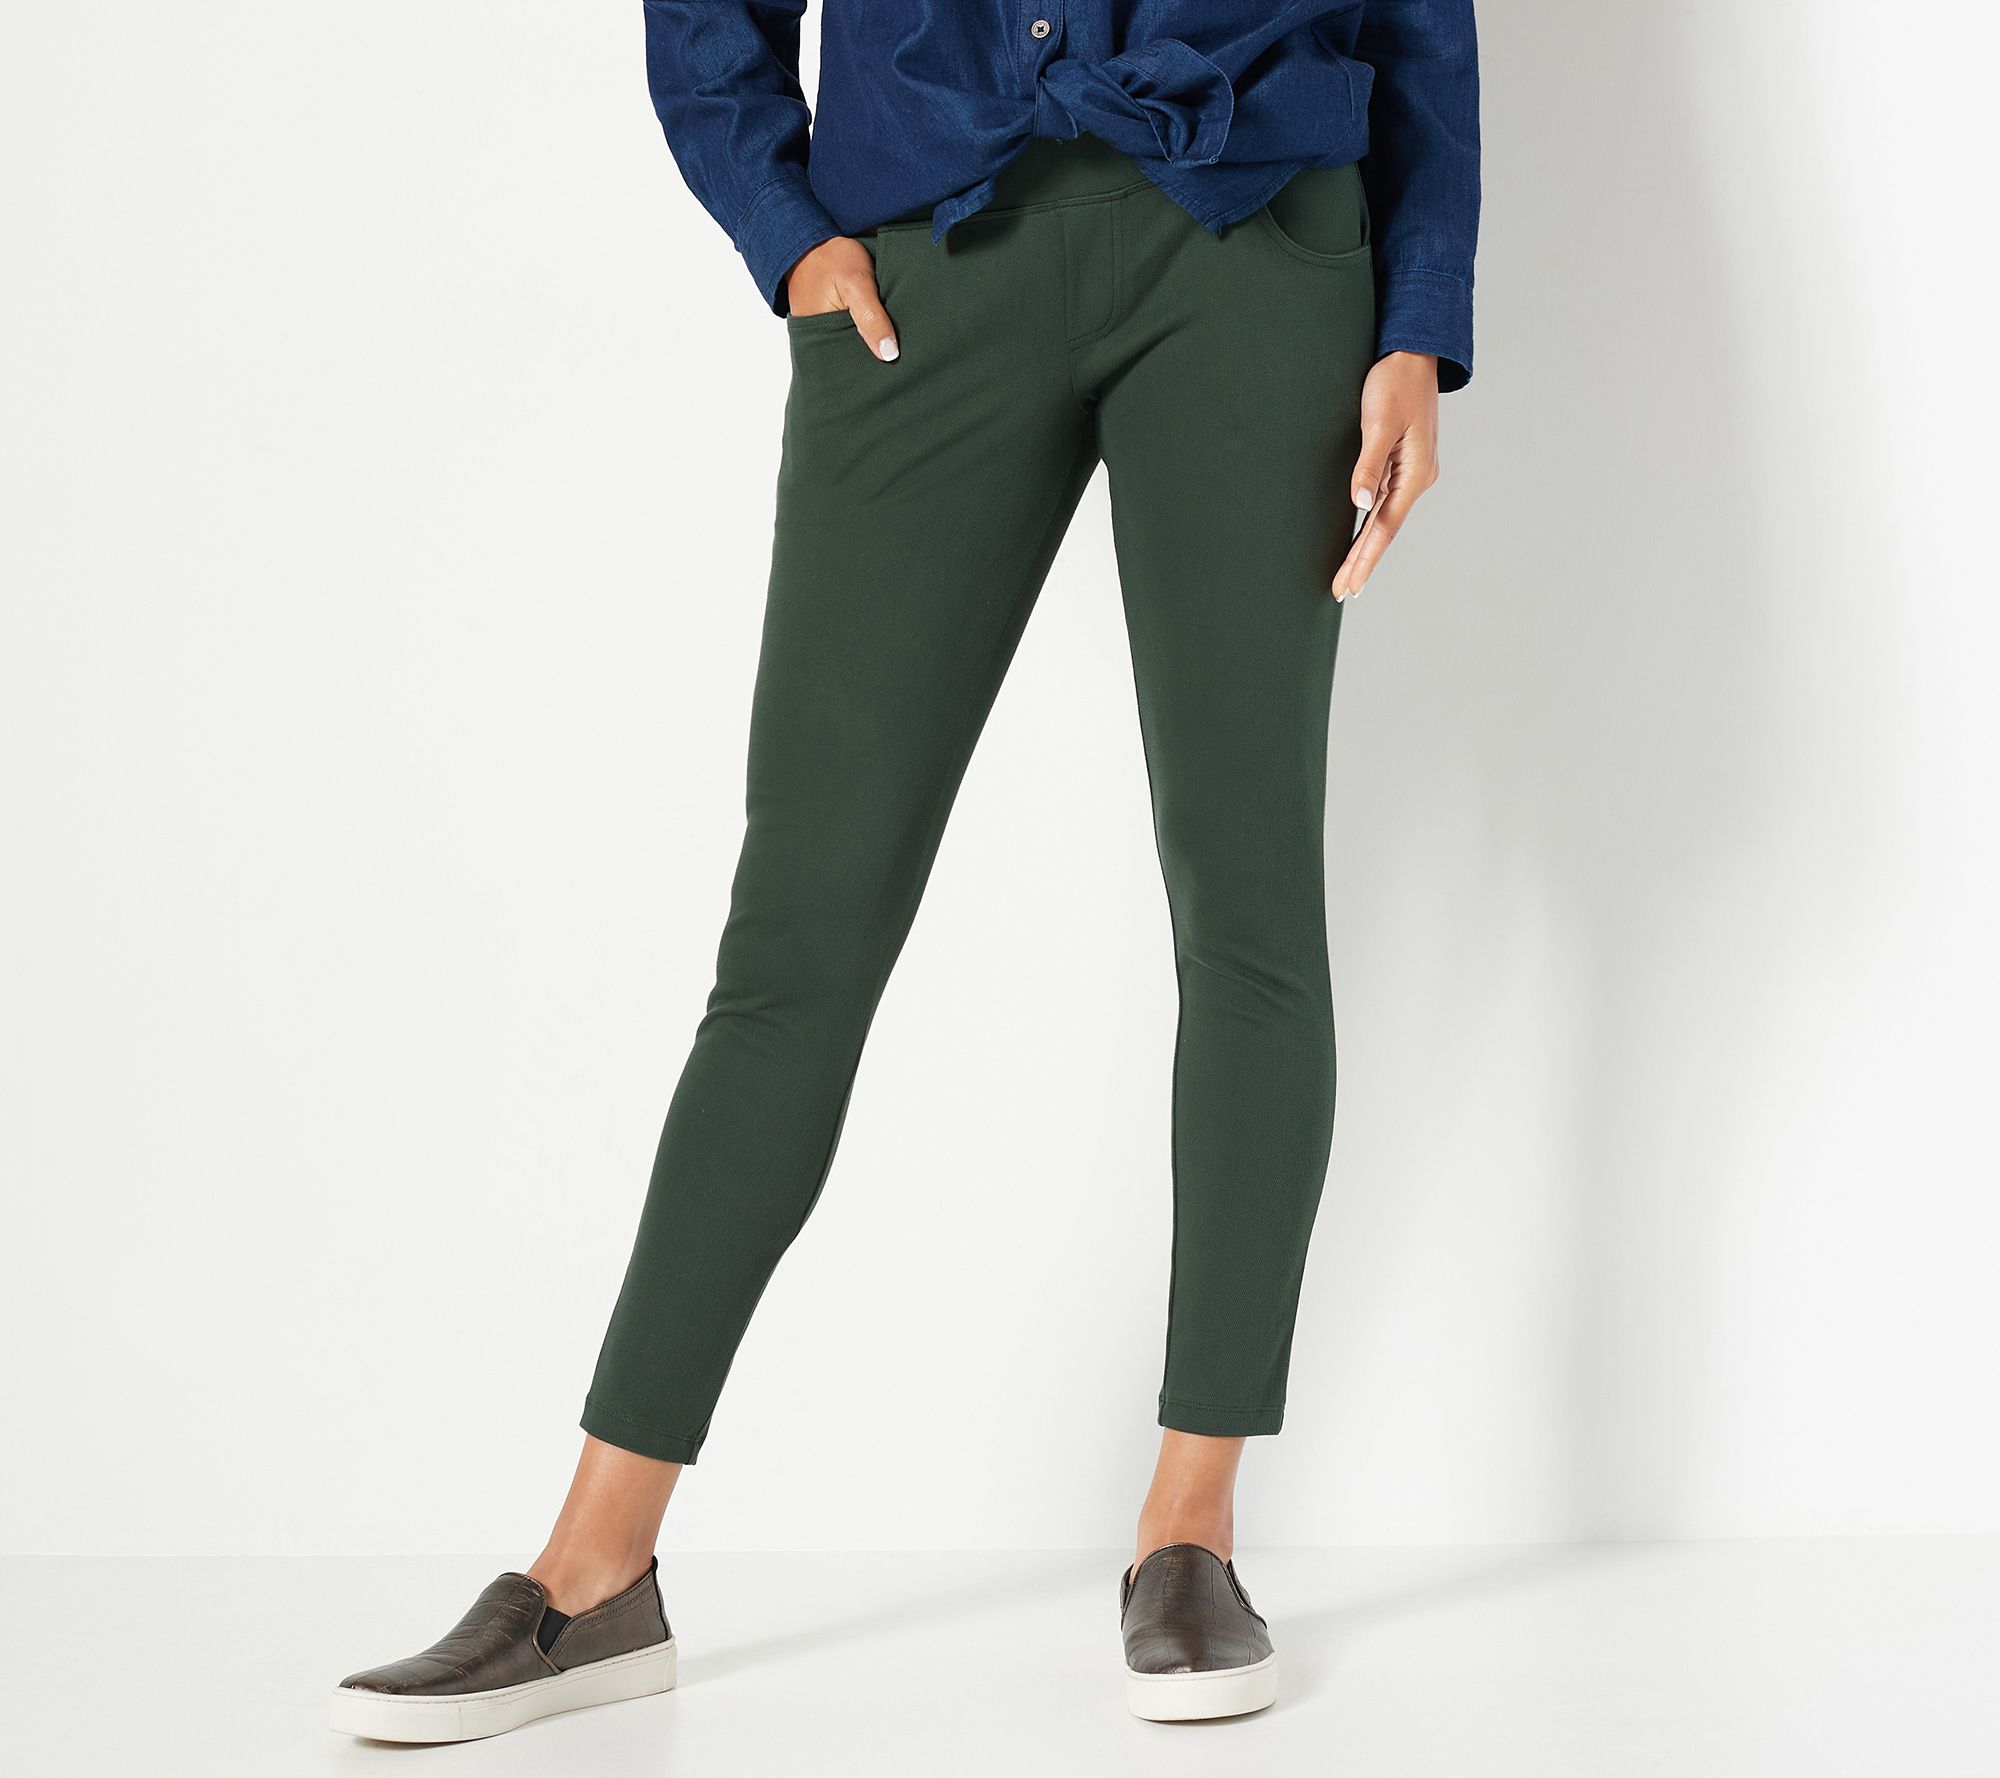 Women with Control Regular Prime Stretch Demin Leggings with Pockets - QVC .com